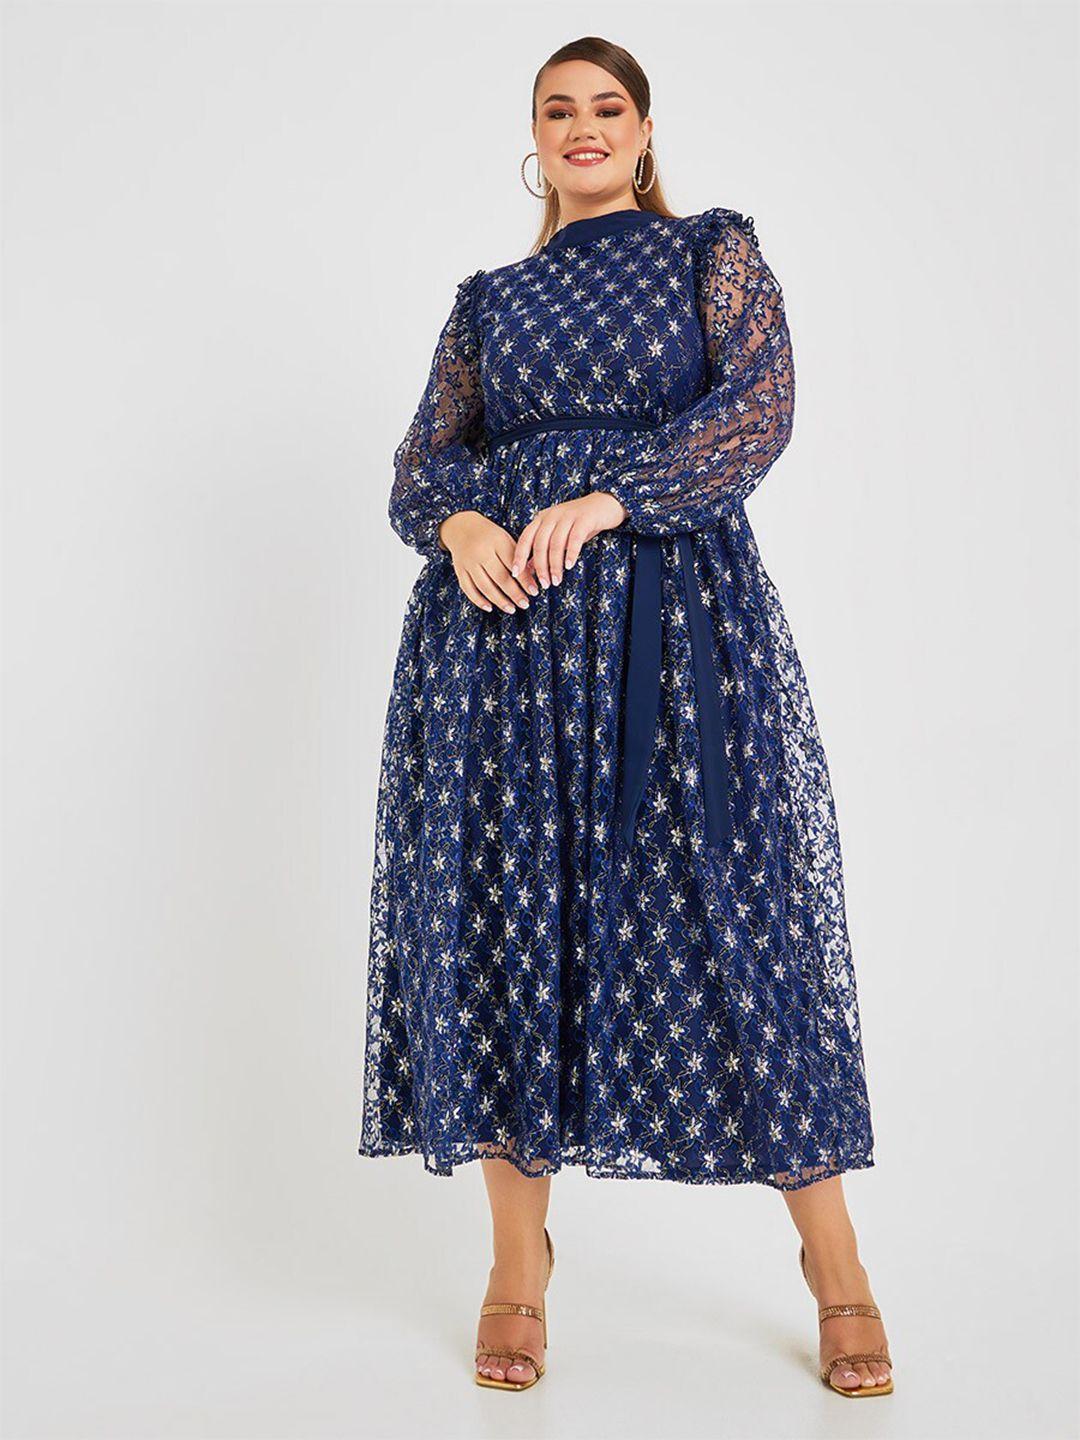 styli-floral-self-design-mock-neck-puff-sleeves-gathered-fit-&-flare-midi-dress